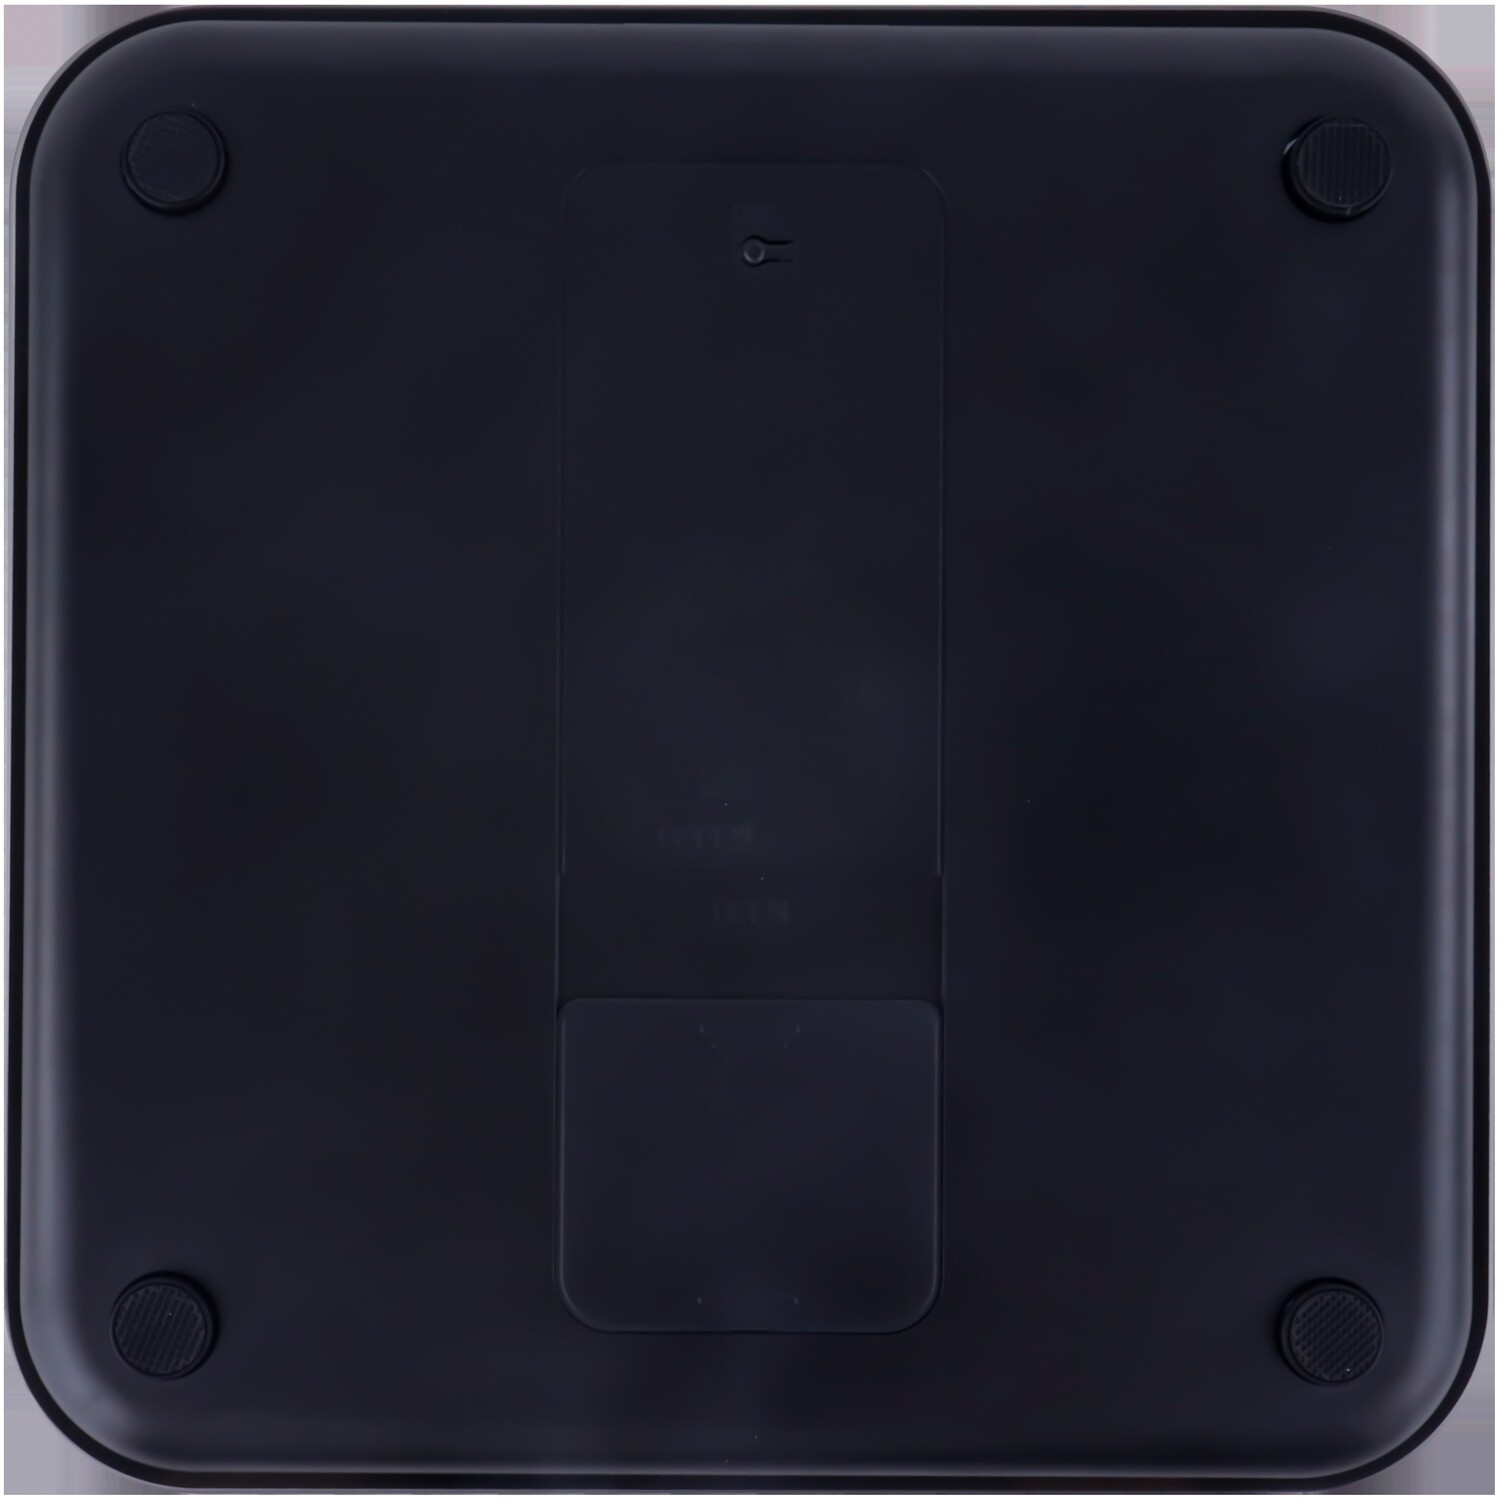 Electronic Body Fat Scale 7 in 1 - Black Image 4